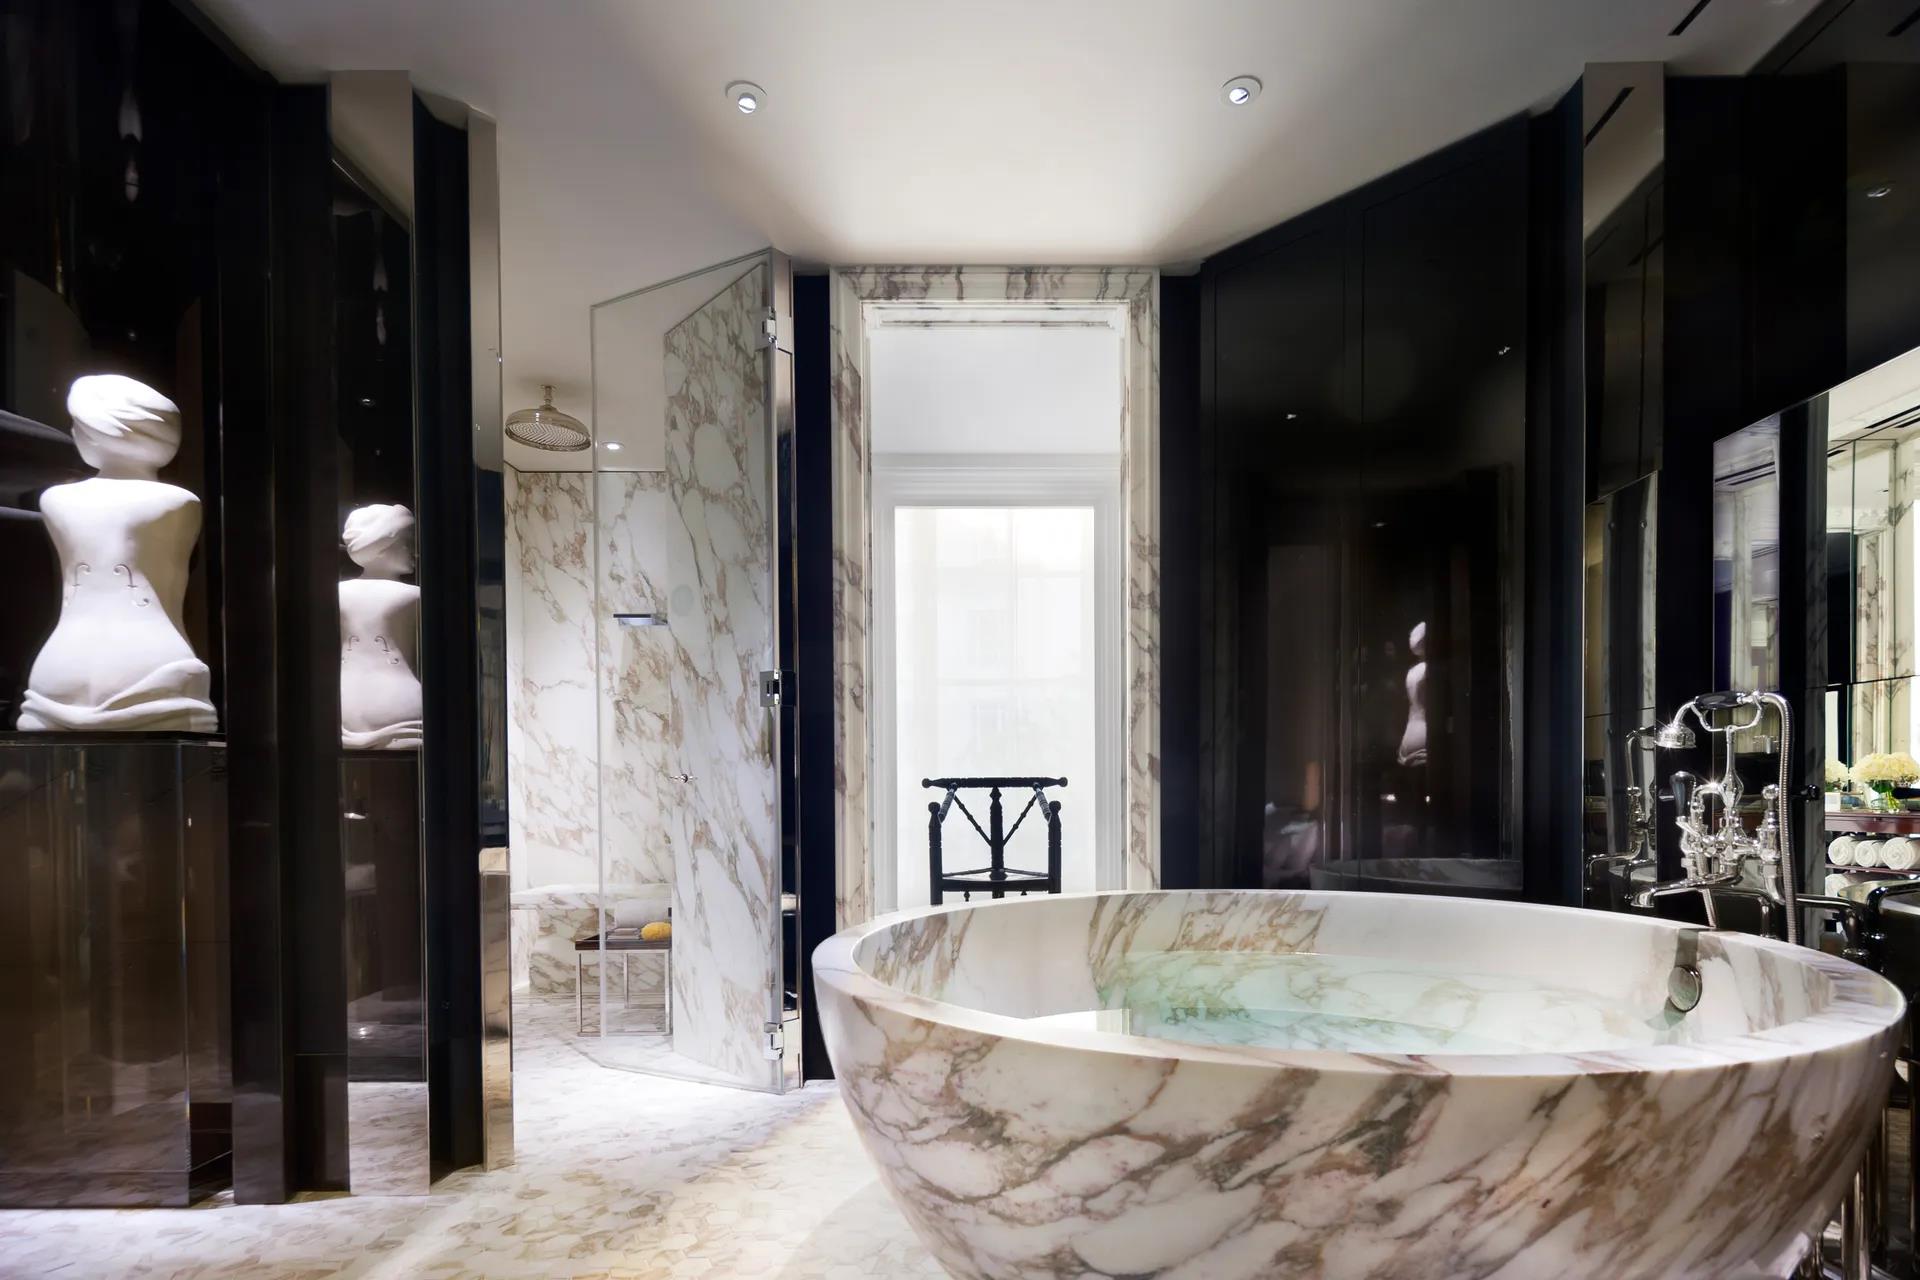 The 5 Most Luxurious Hotel Bathrooms in the World